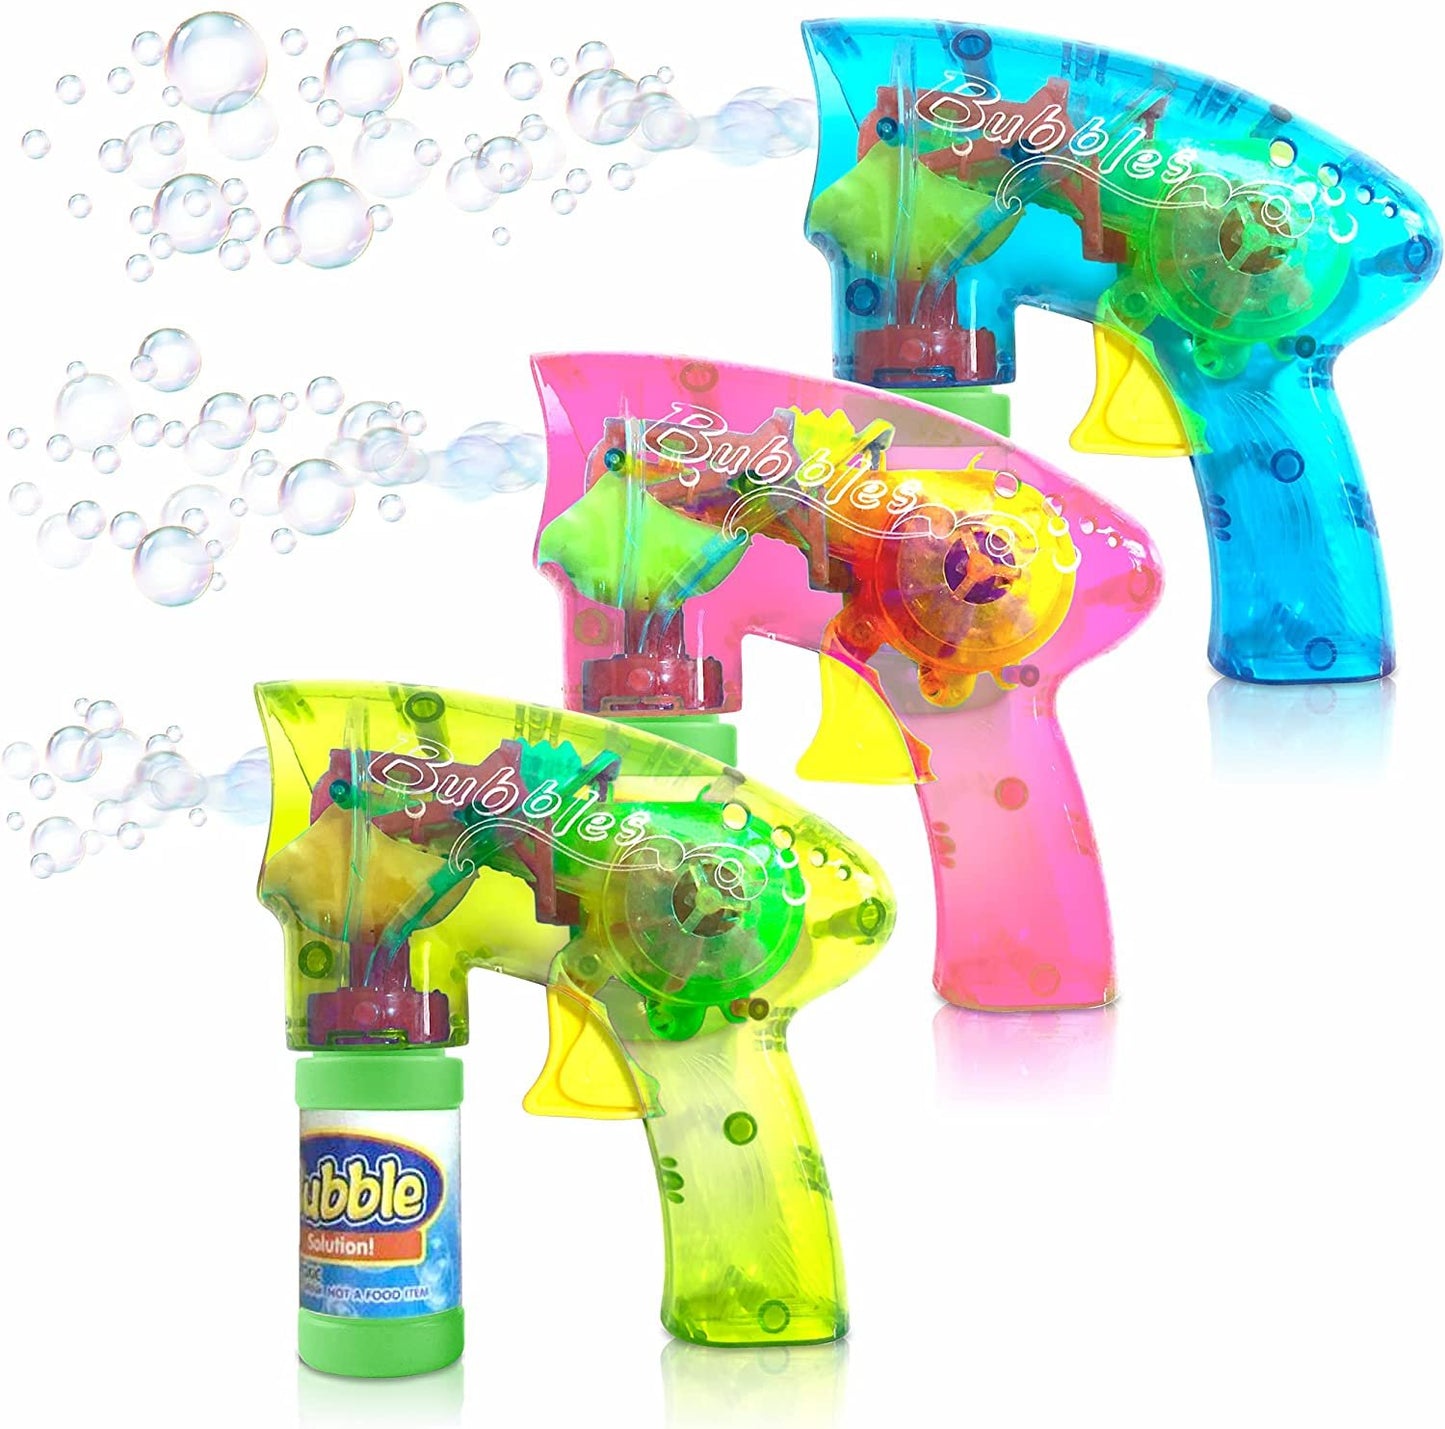 ArtCreativity Friction Powered Light Up Bubble Blaster Gun Set - Set of 3 - Includes 3 LED Bubbles Guns and 6 Bottles of Bubble Fluid - No Batteries Needed - Outdoor, Indoor Fun - Gift Idea, Party